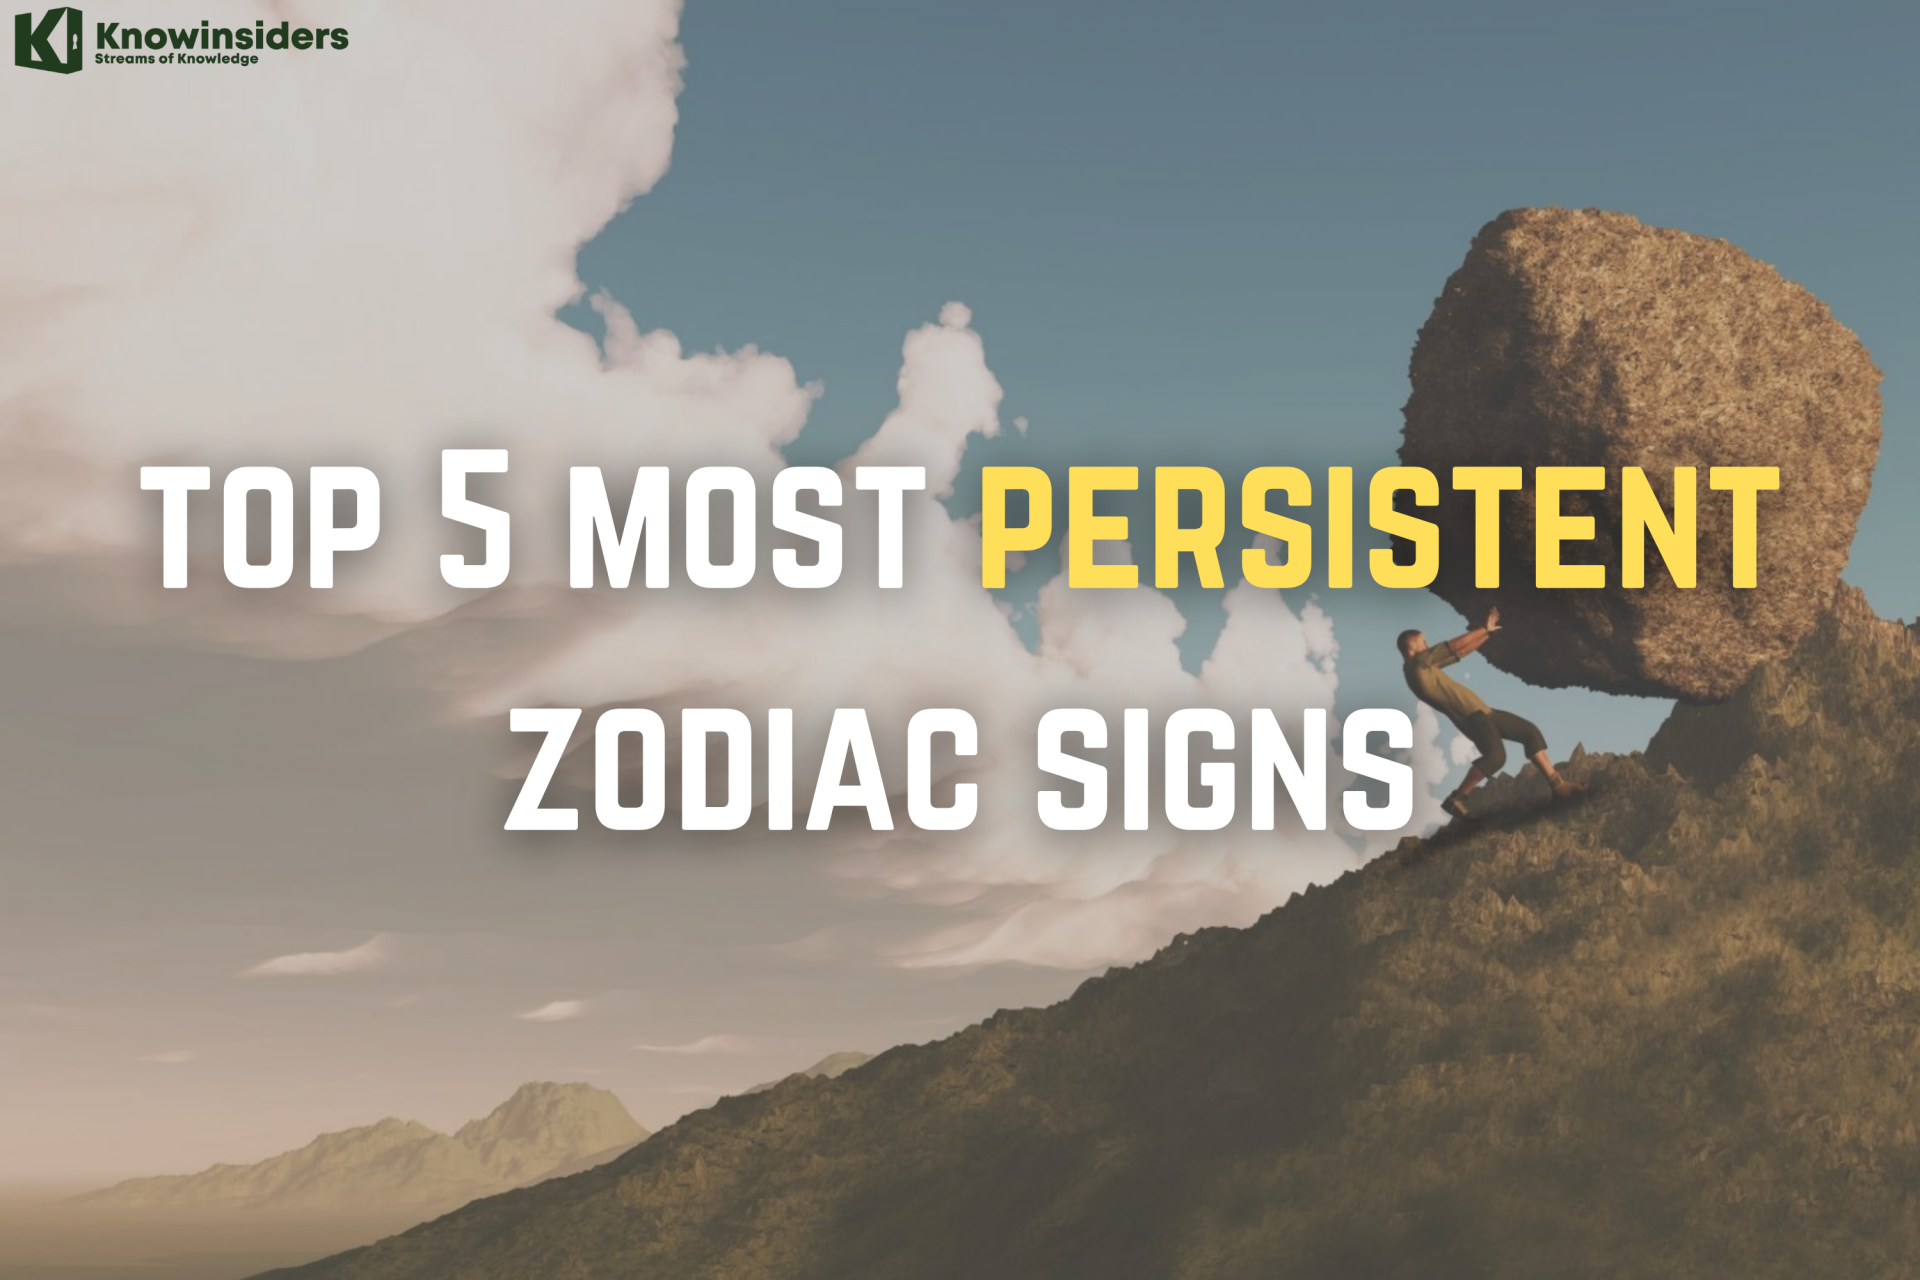 Top 5 Most Persistent Zodiac Signs, Earth Signs At The Top!